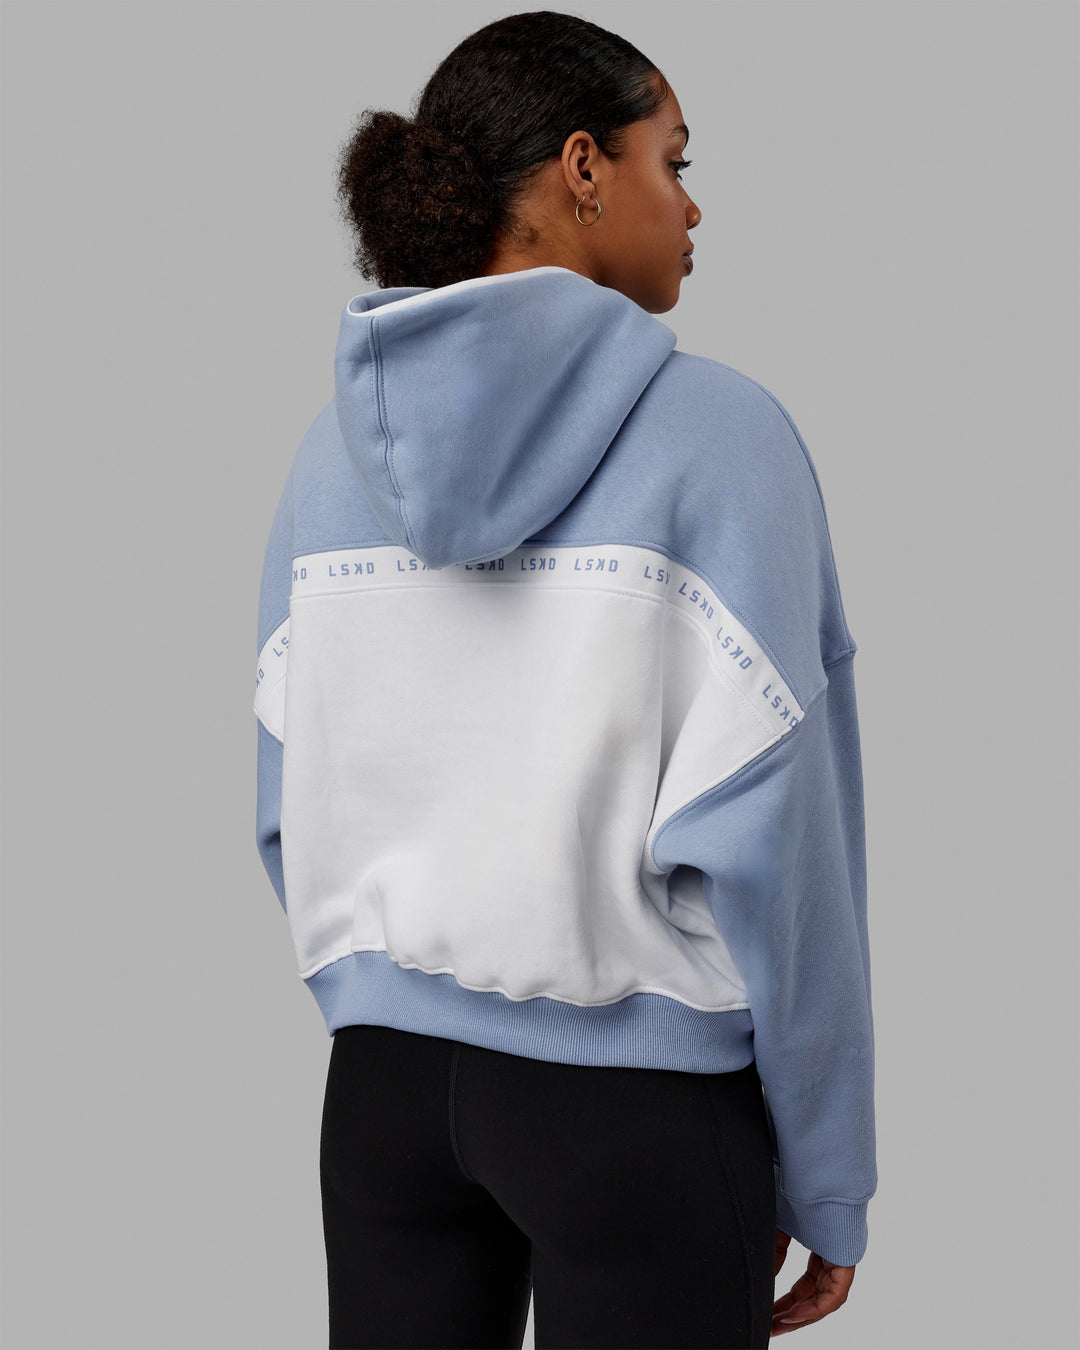 Woman wearing Extend Hoodie - Arctic Blue-White